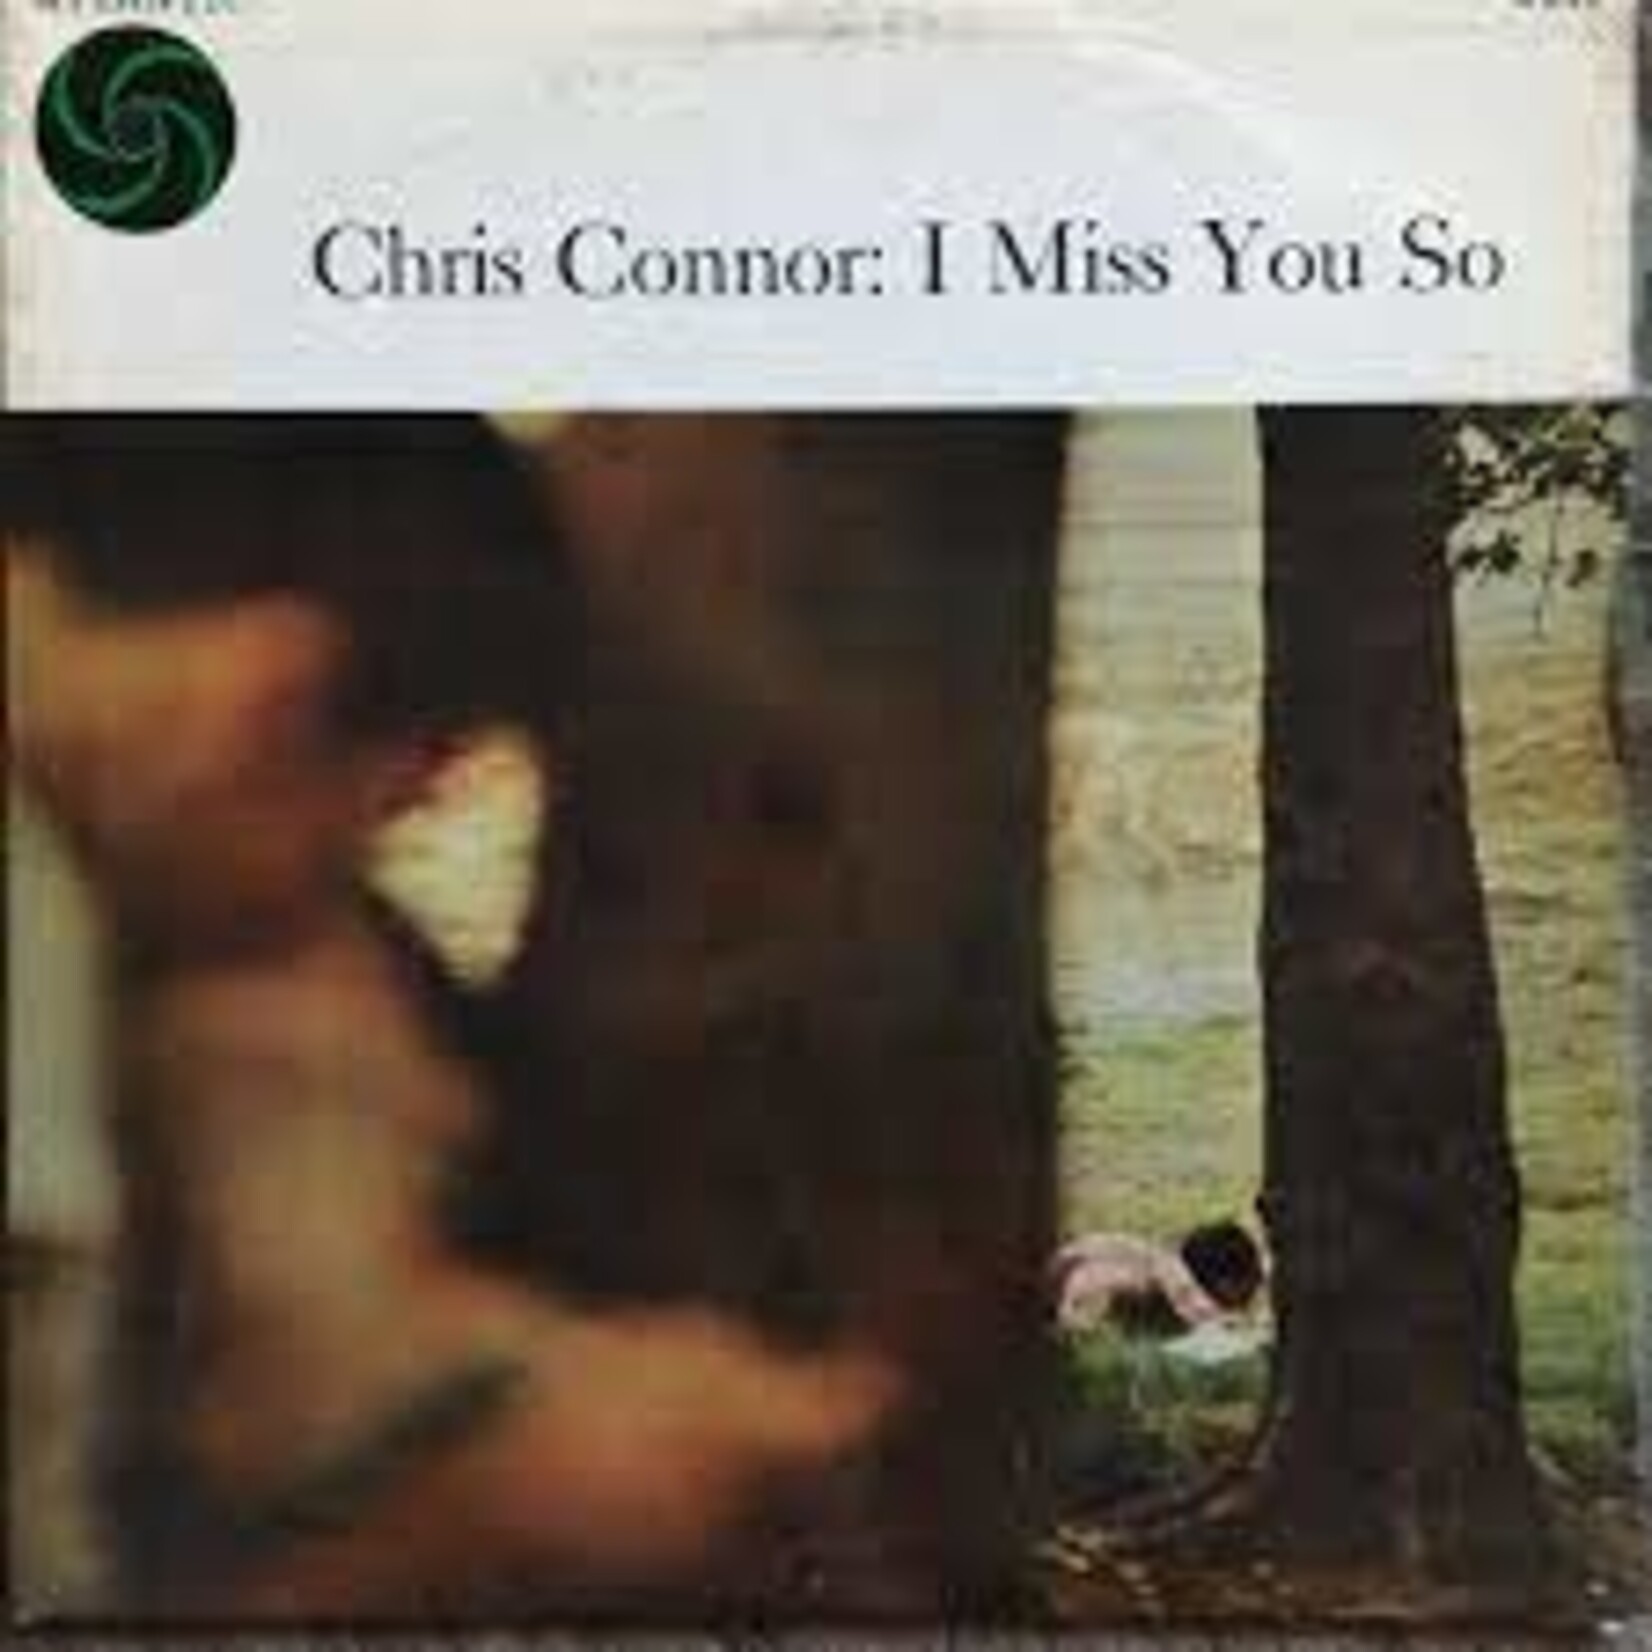 Chris Connor - I Miss You So - Vinyl LP (USED)